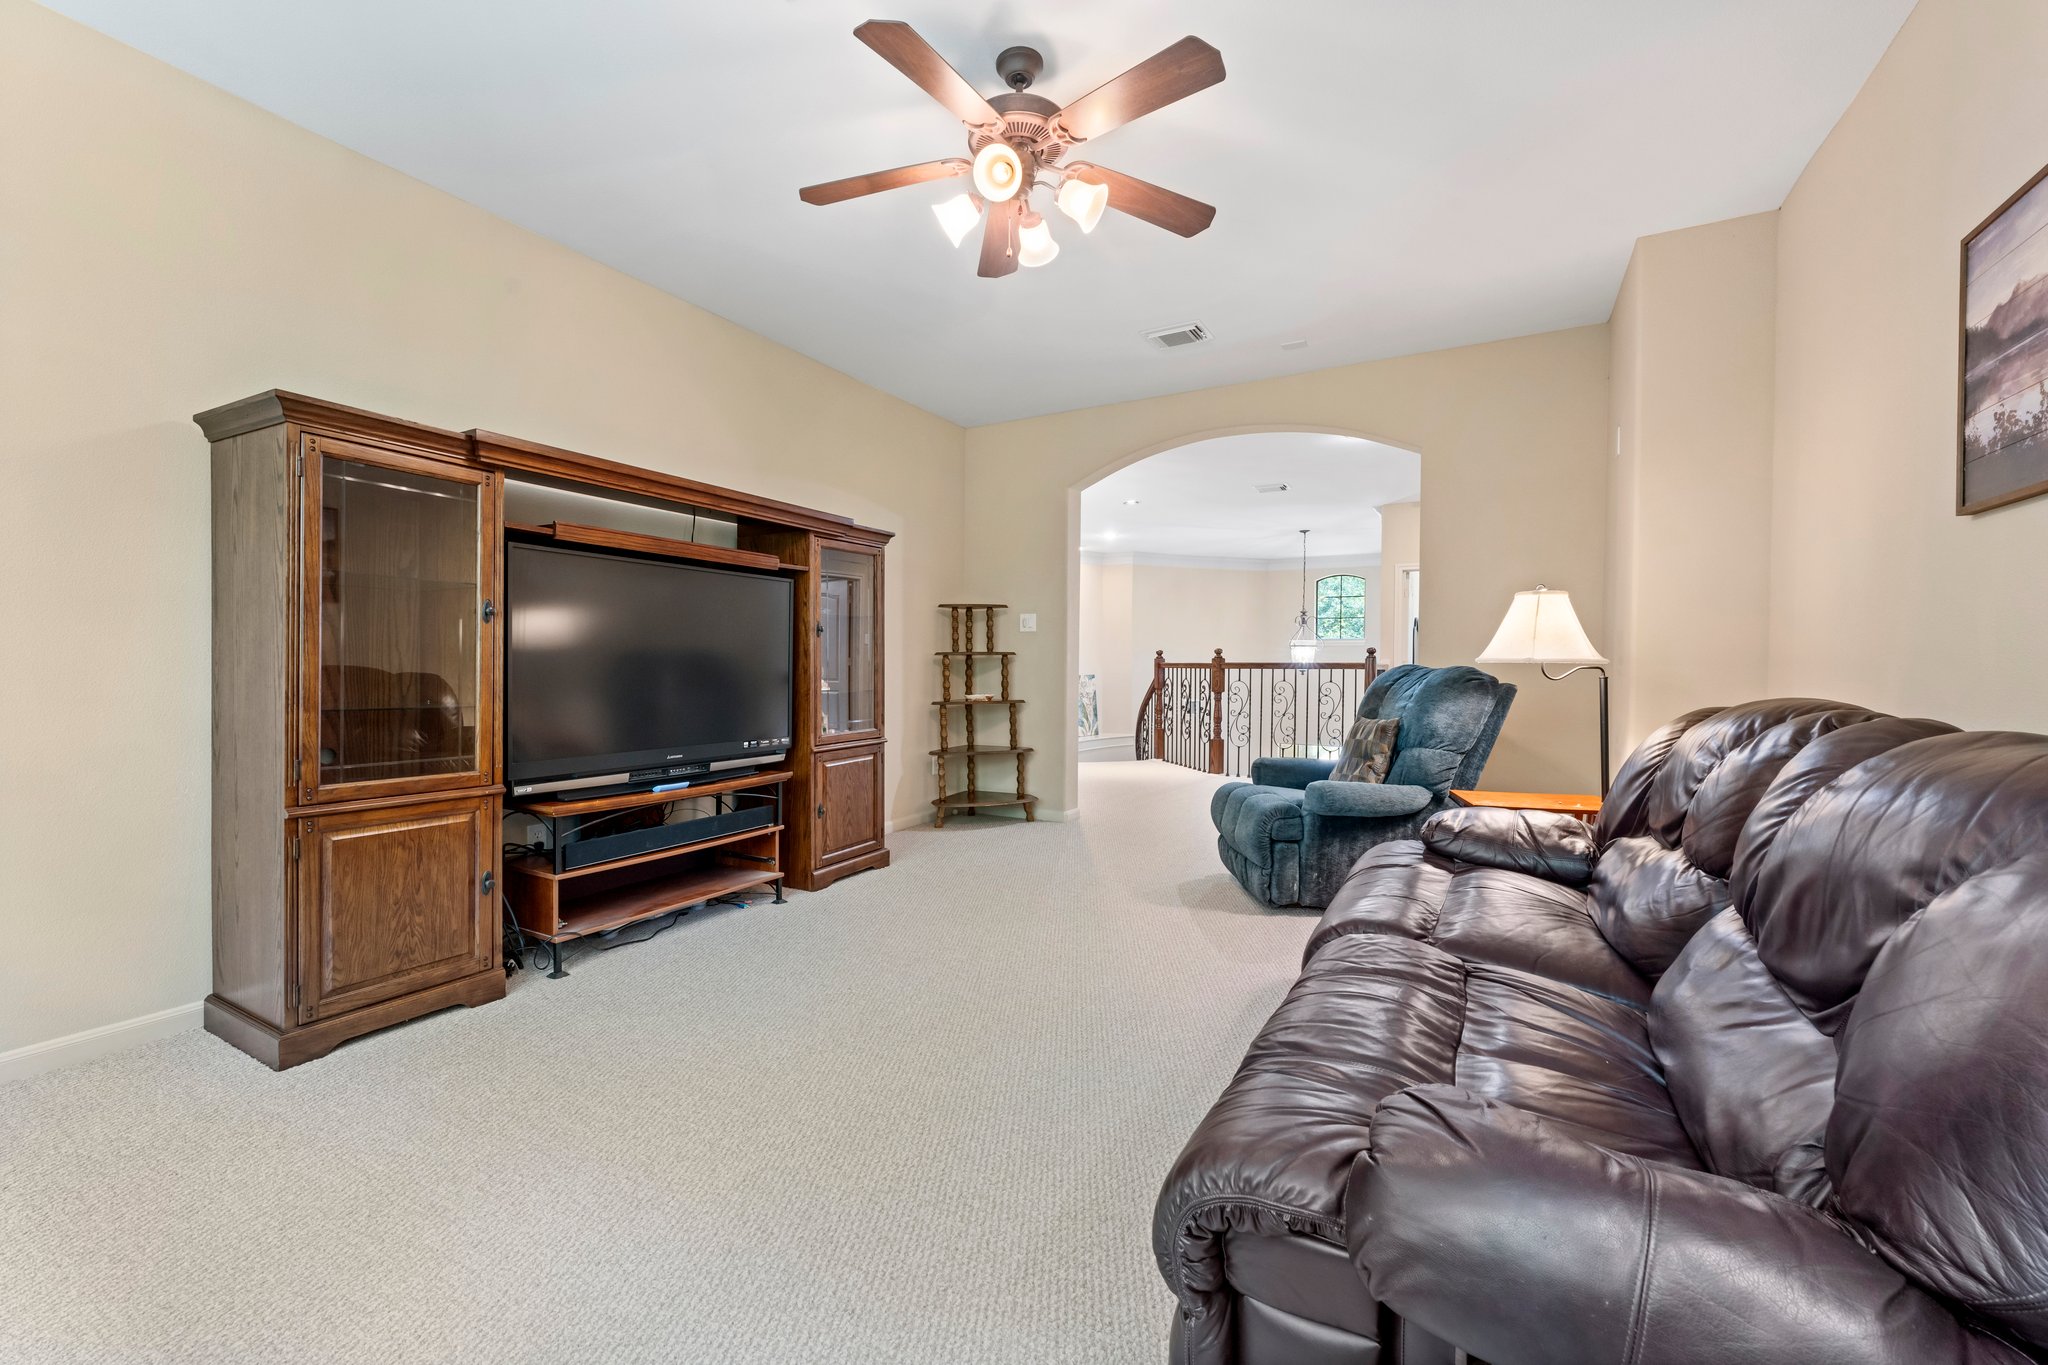 Another view of Upstairs game/family room with ceiling fan and arch entry.